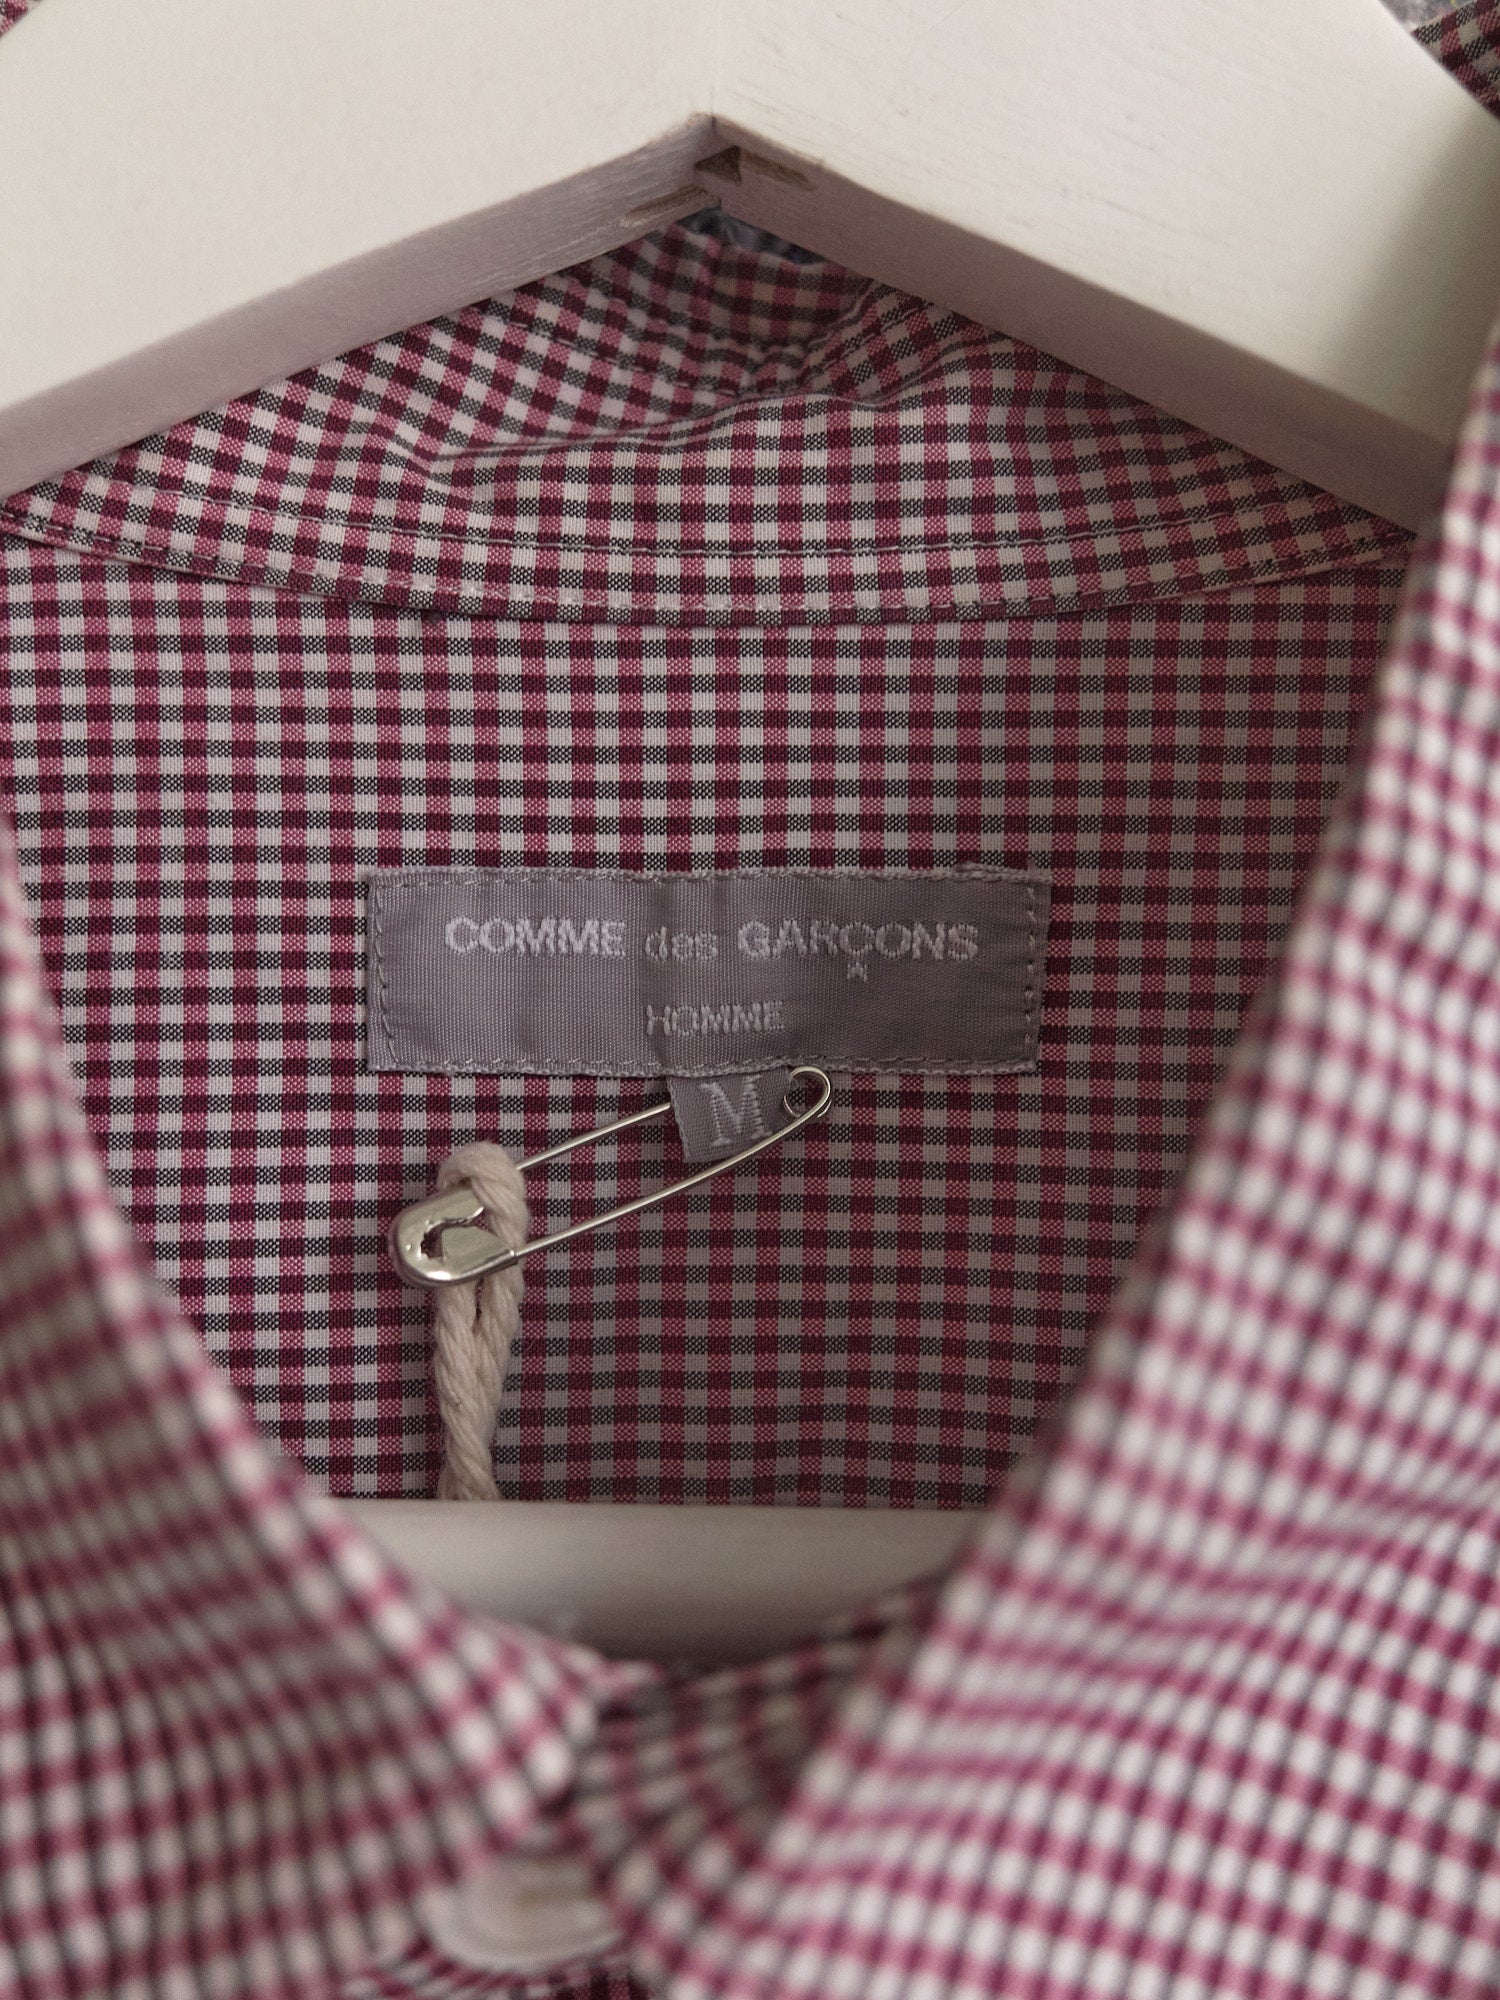 Comme des Garcons Homme 2003 purple white gingham taped seam shirt - size M